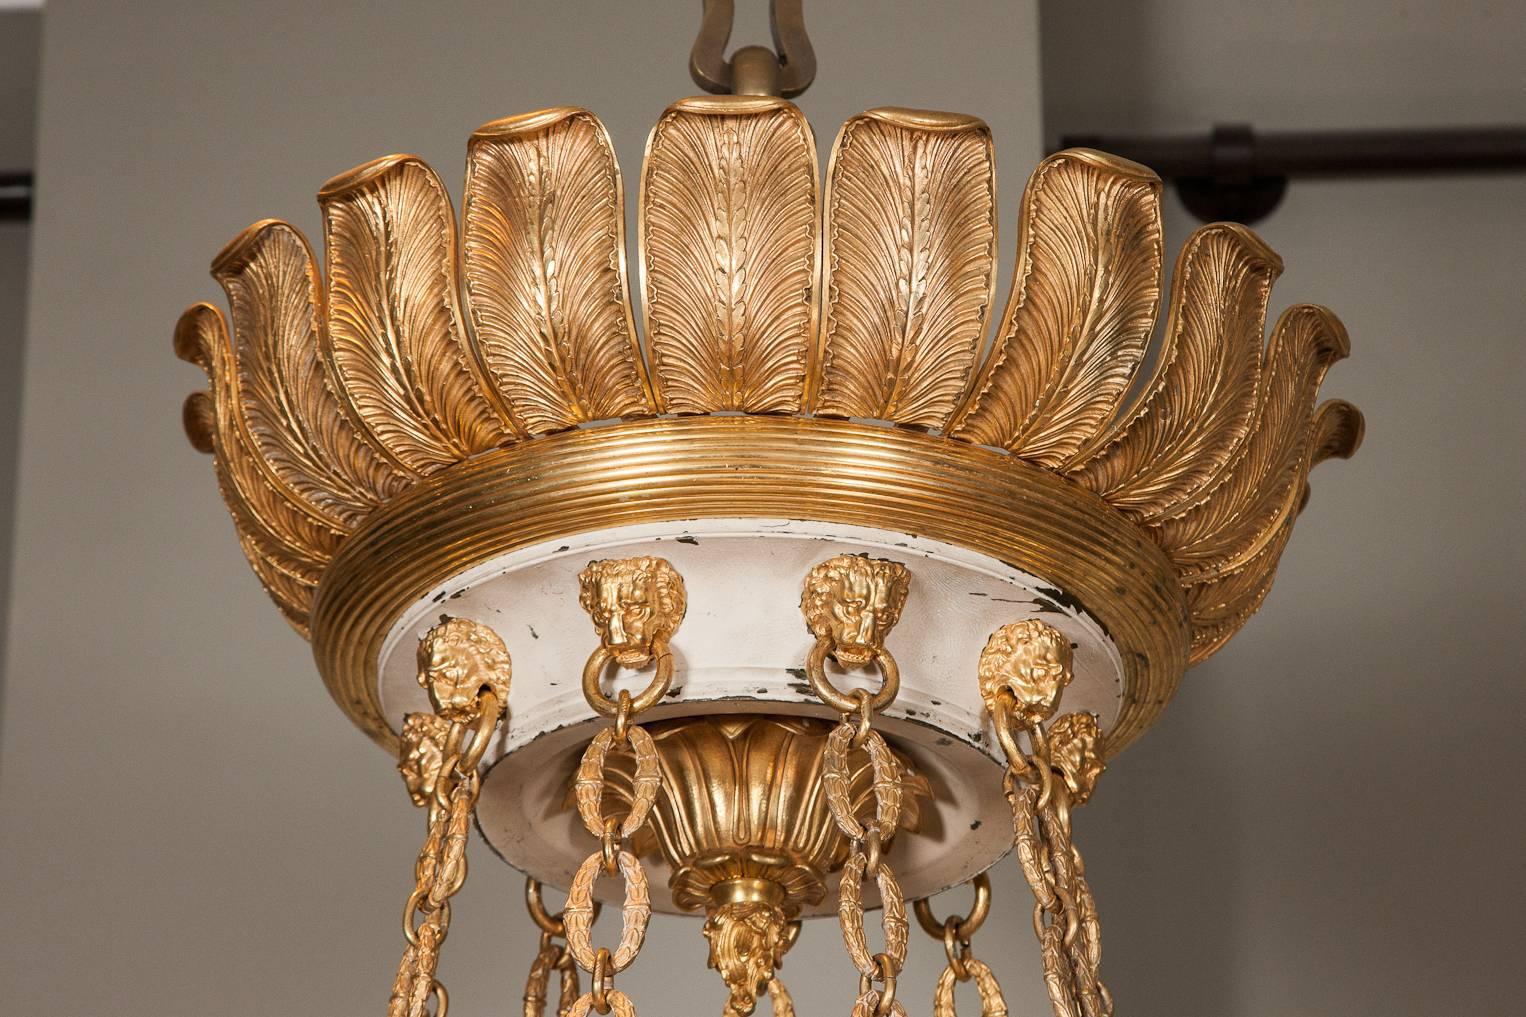 A spectacular bronze and painted tole chandelier, circa 1840-1850.